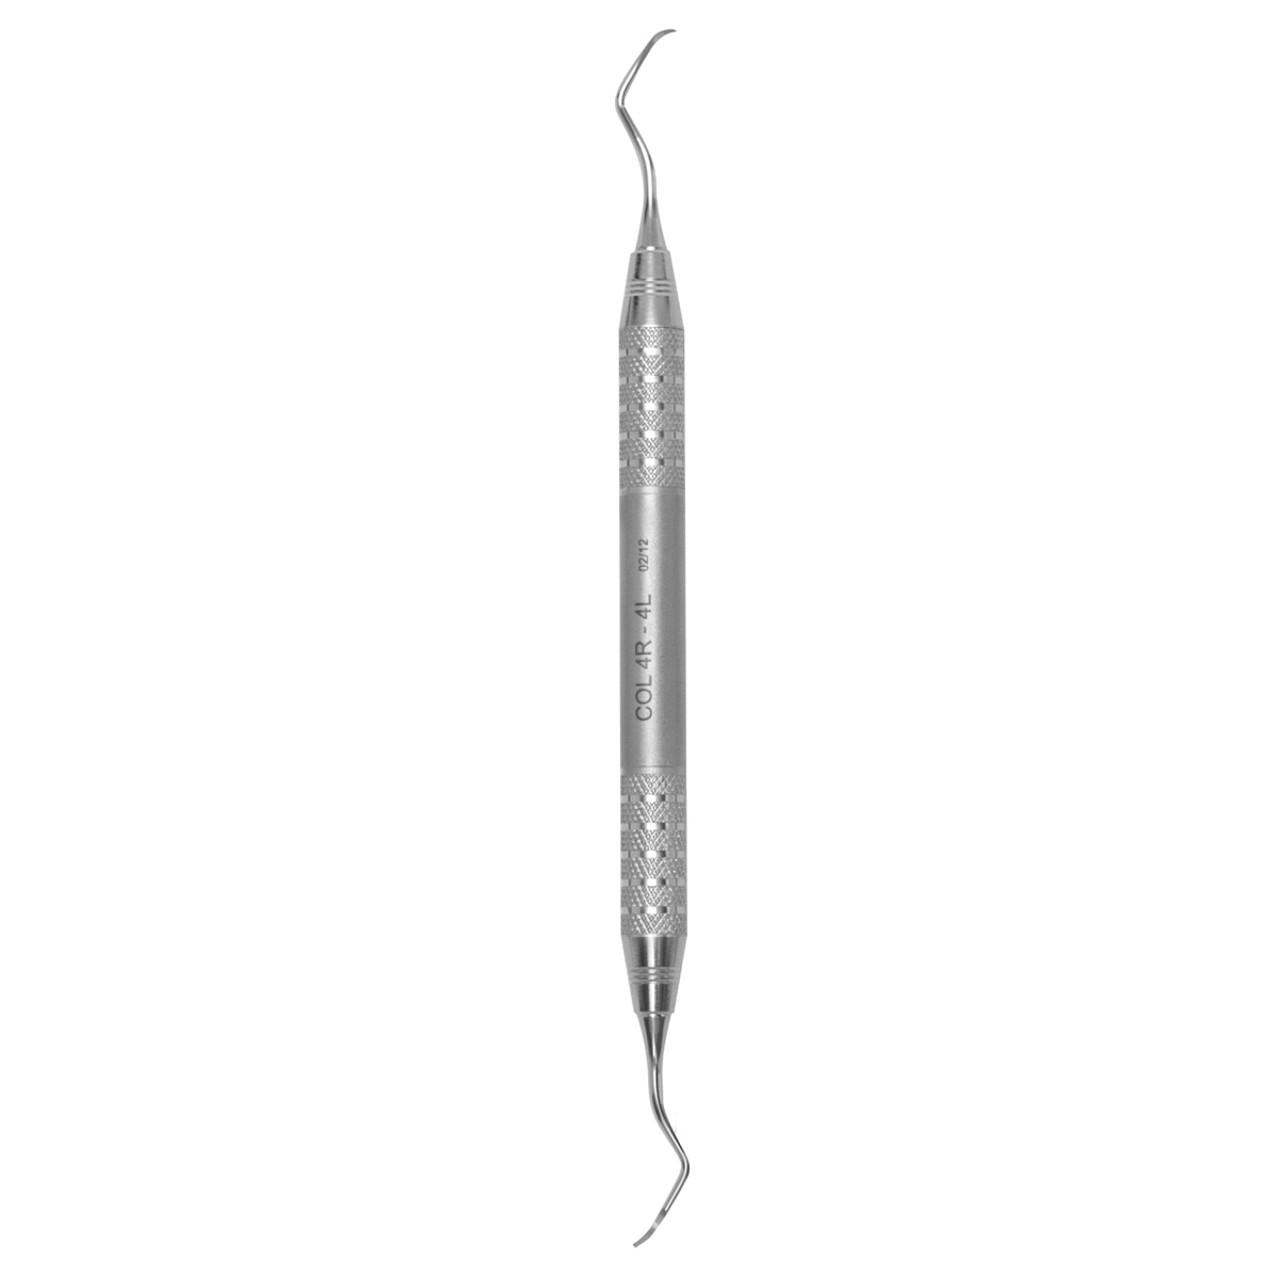 A.Titan - Columbia 4R-4L has a deeper shank angle when compared with the barnhart 5-6 and is good for heavier posterior deposits. Has a #6 Life Steel handle.